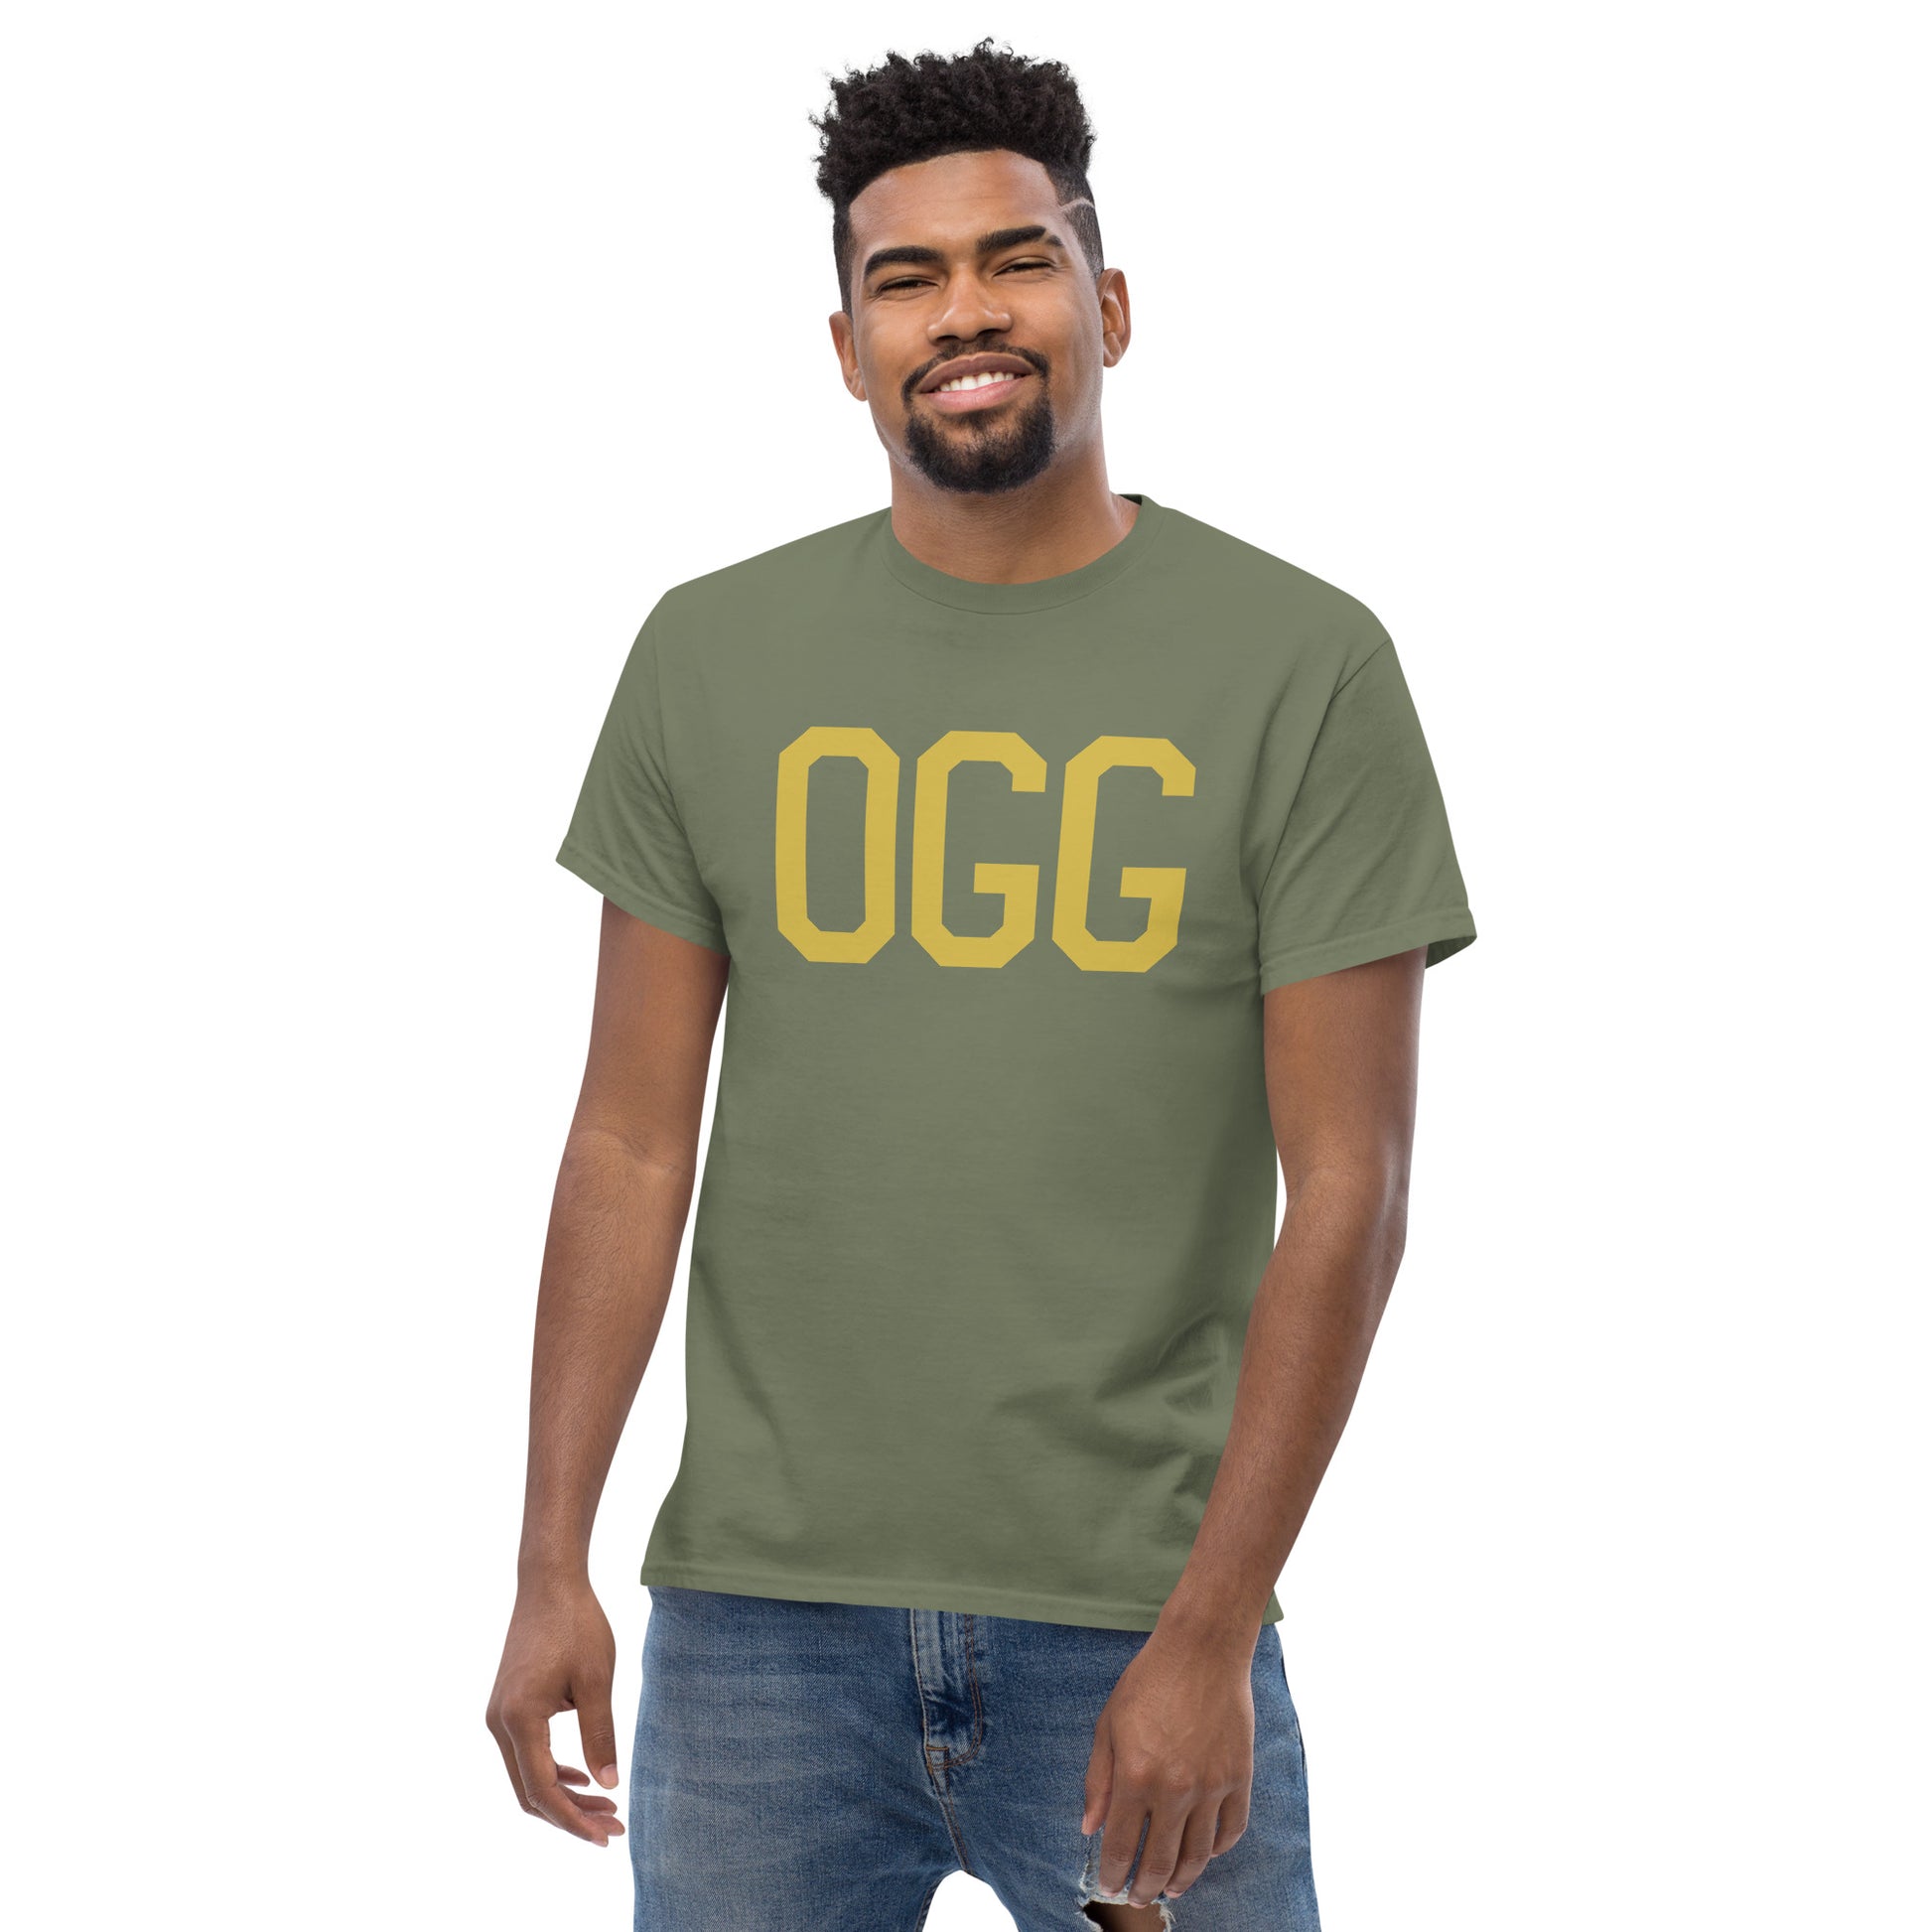 Aviation Enthusiast Men's Tee - Old Gold Graphic • OGG Maui • YHM Designs - Image 06